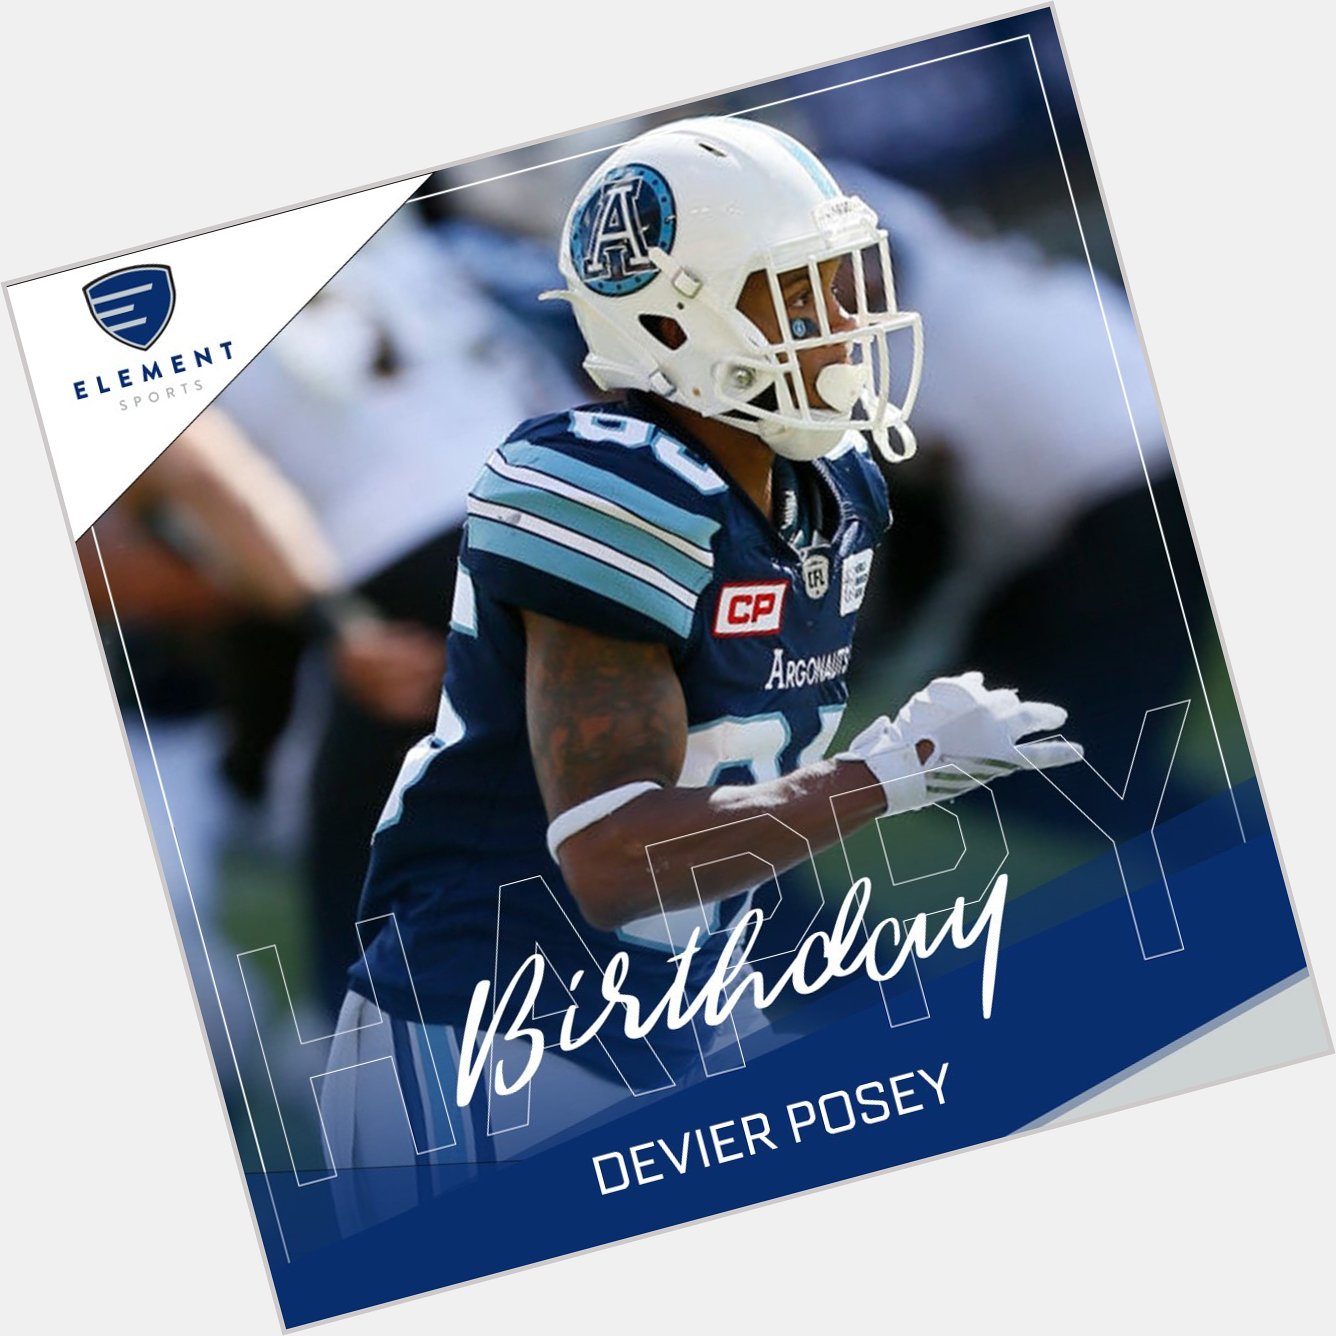 Wishing very happy birthday to the man, DeVier Posey ( 